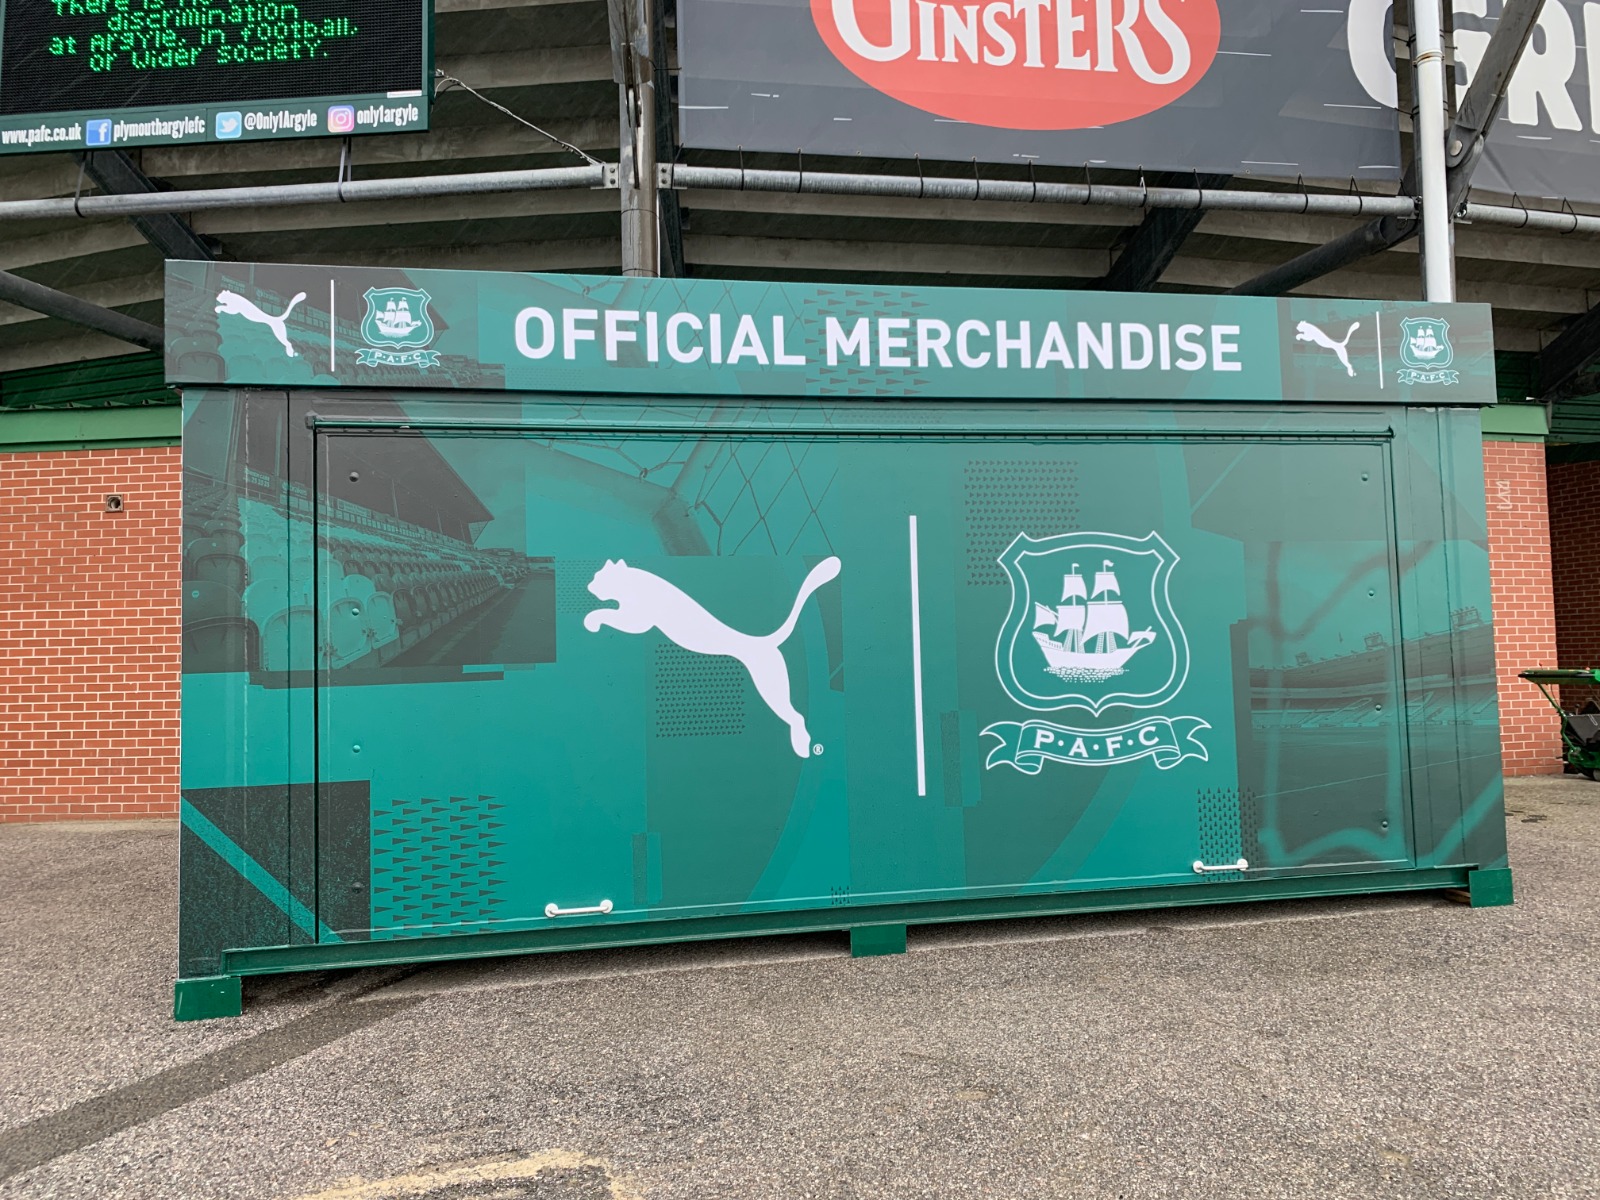 Retail outlet at Home Park Stadium